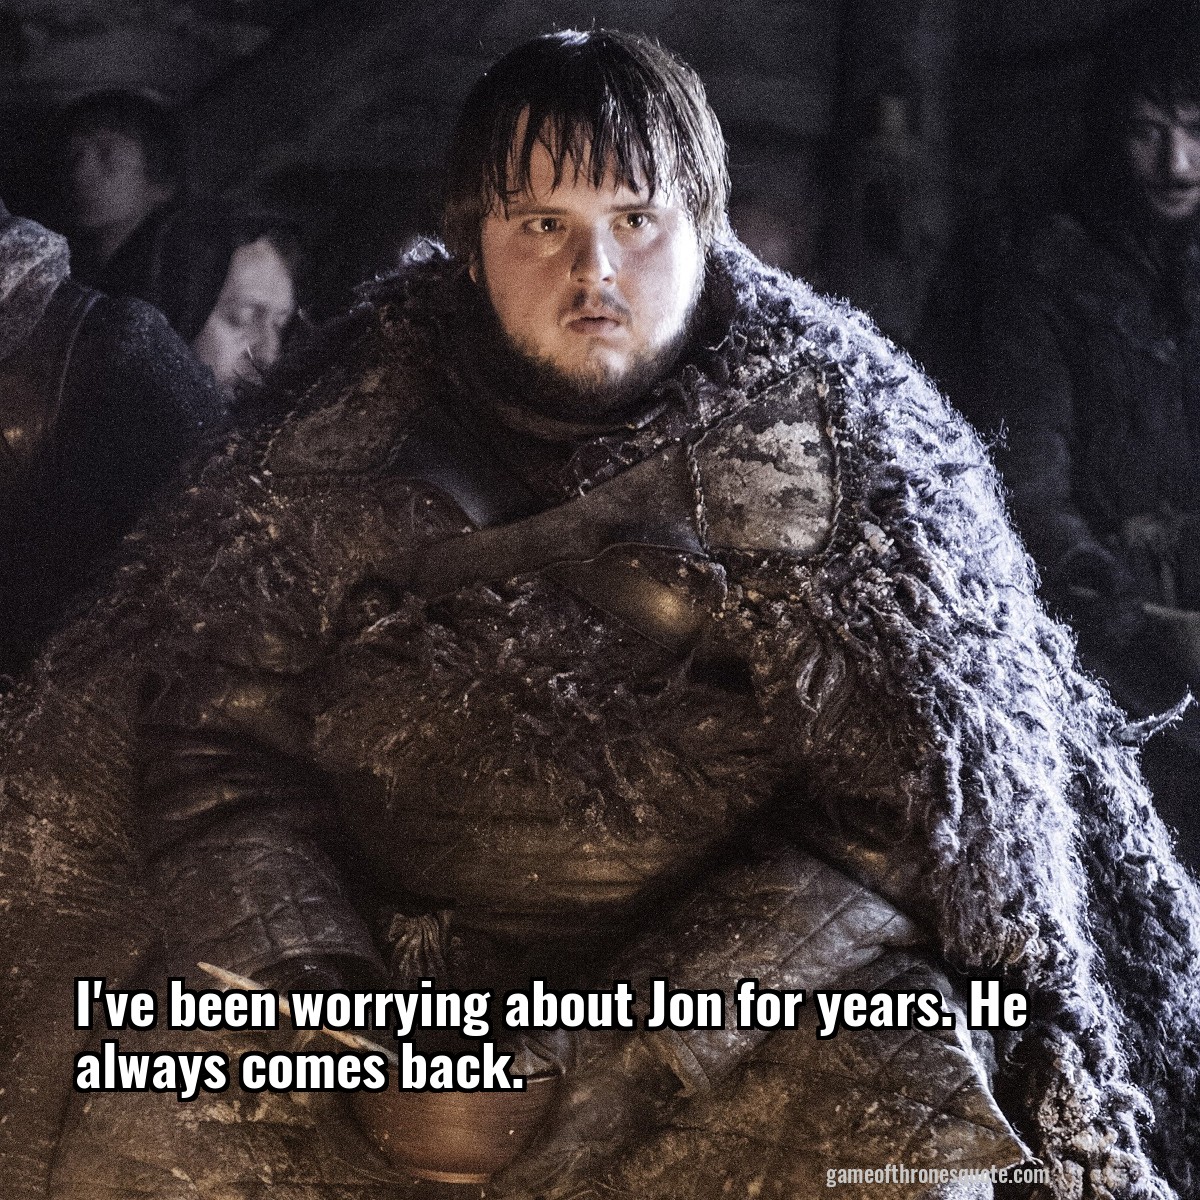 I've been worrying about Jon for years. He always comes back.